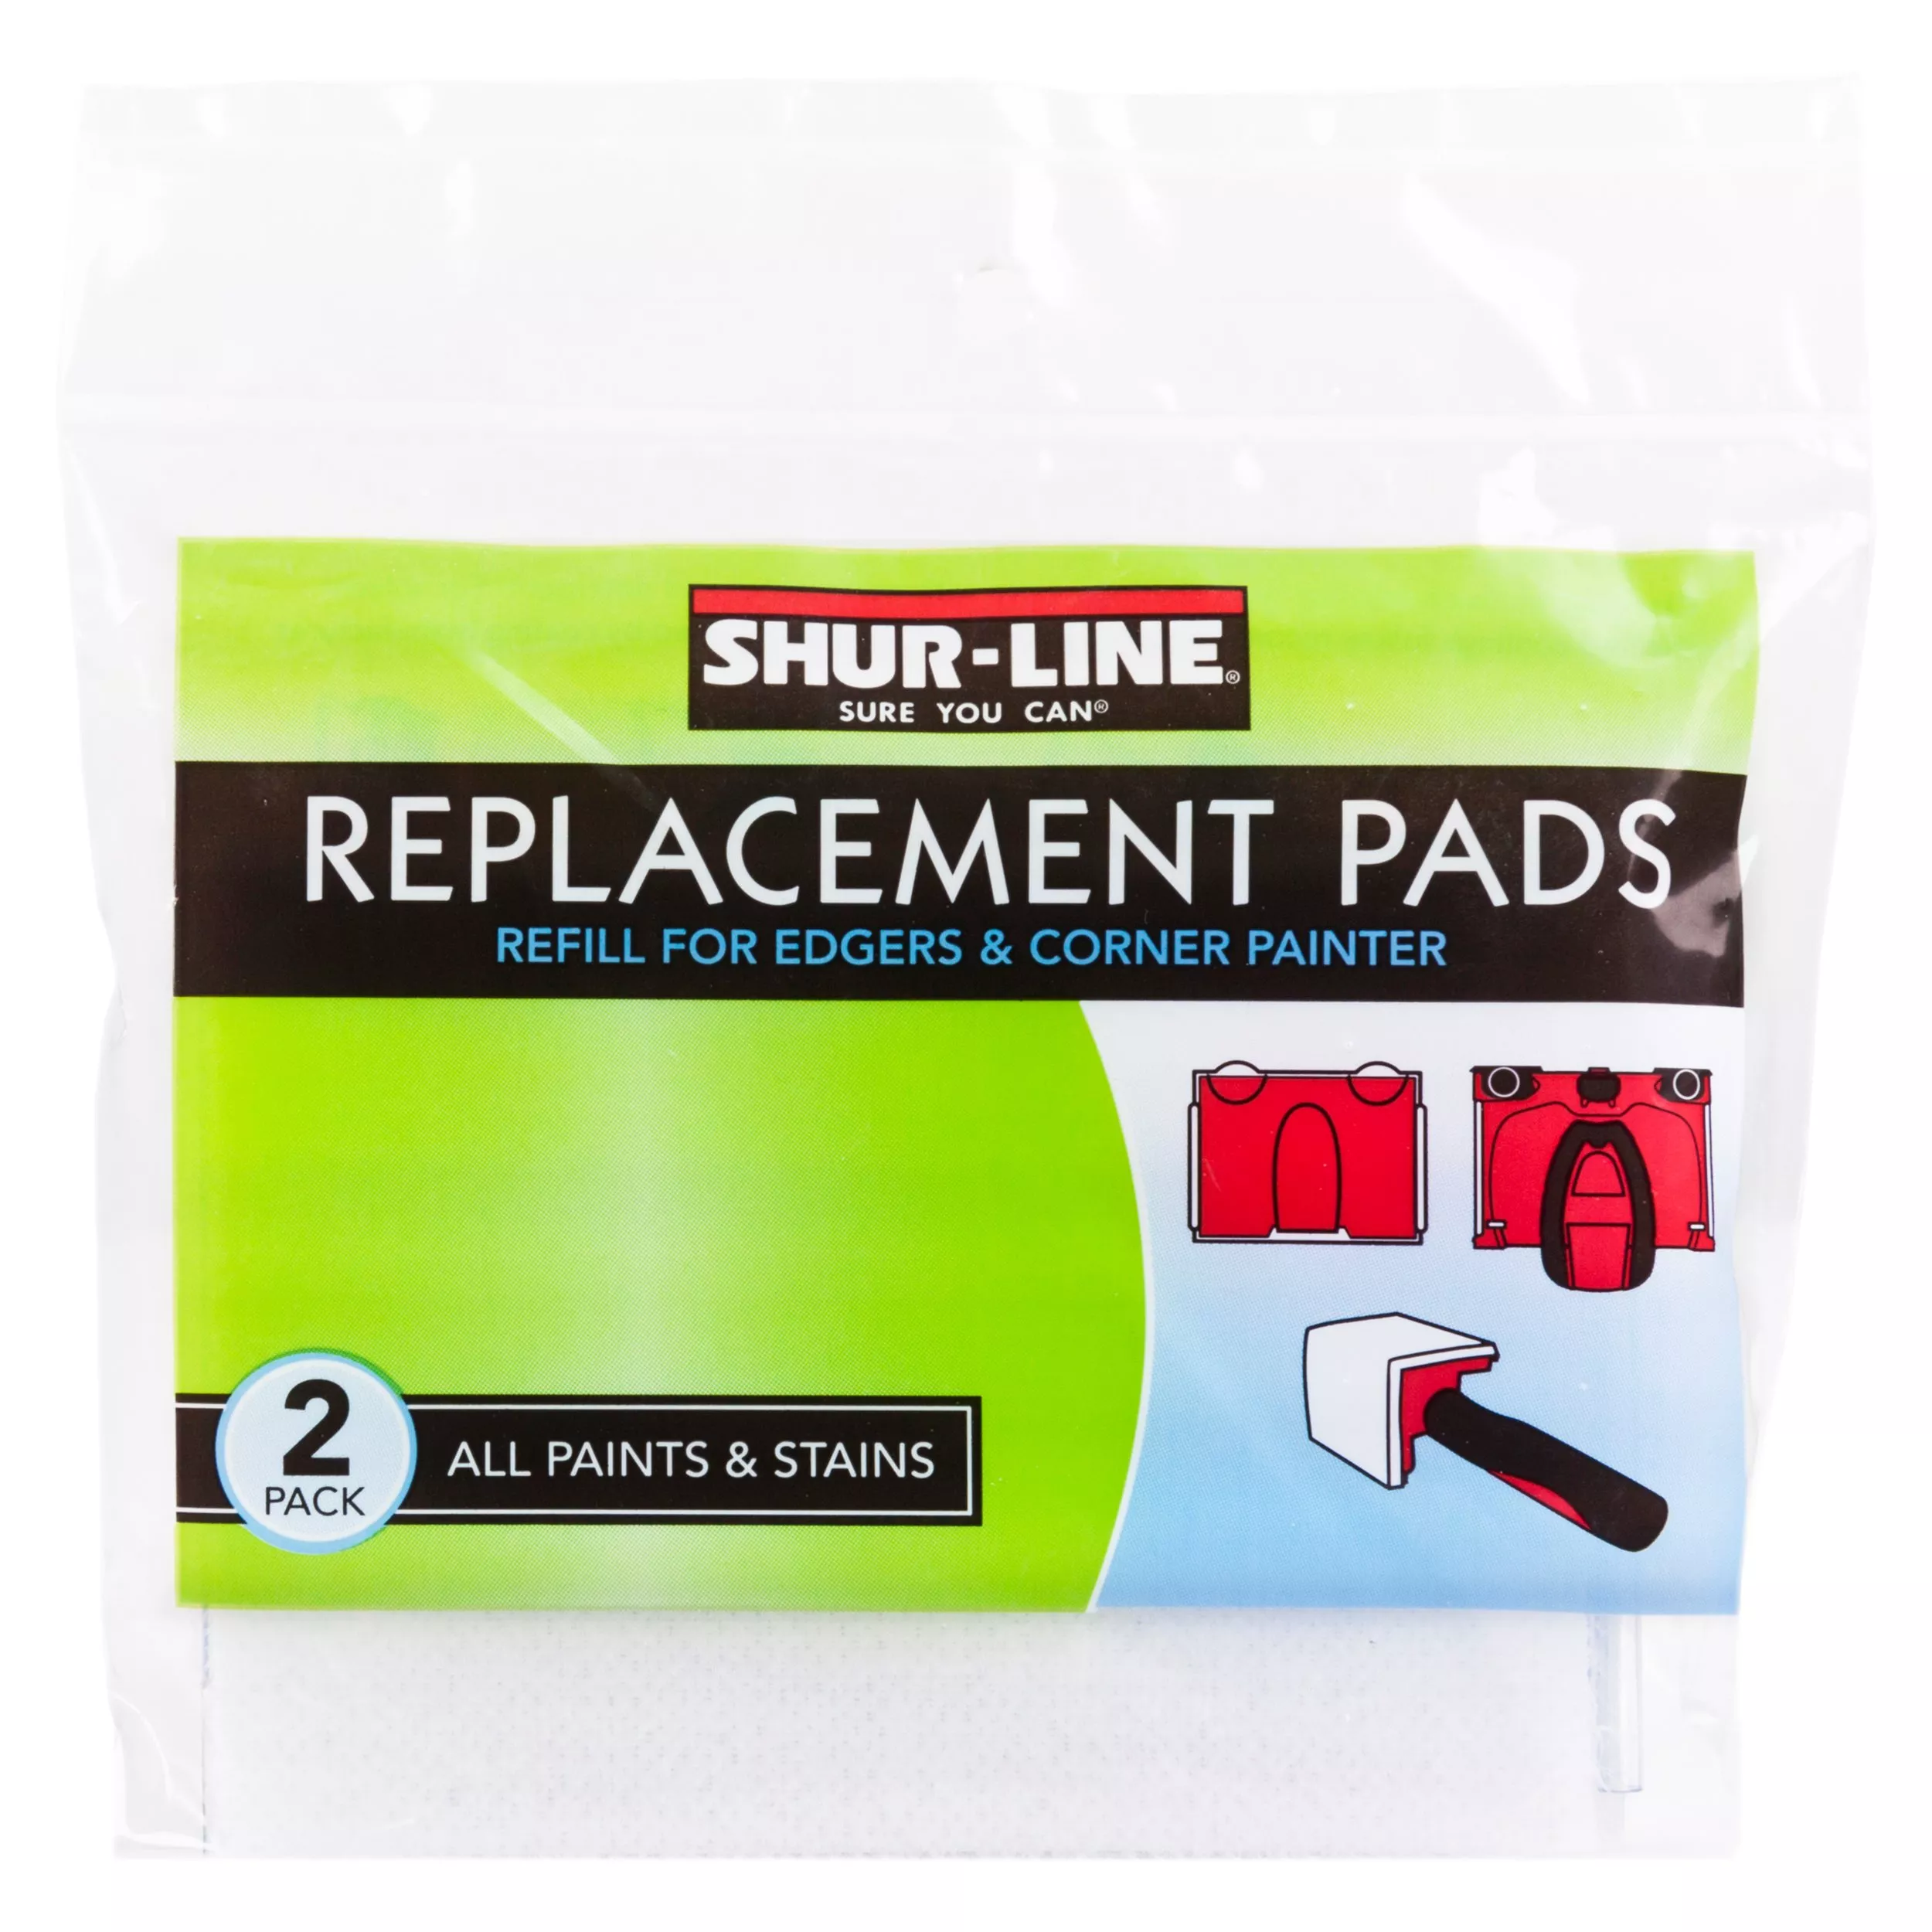 Shurline Edger Replacement Pads 2 pack